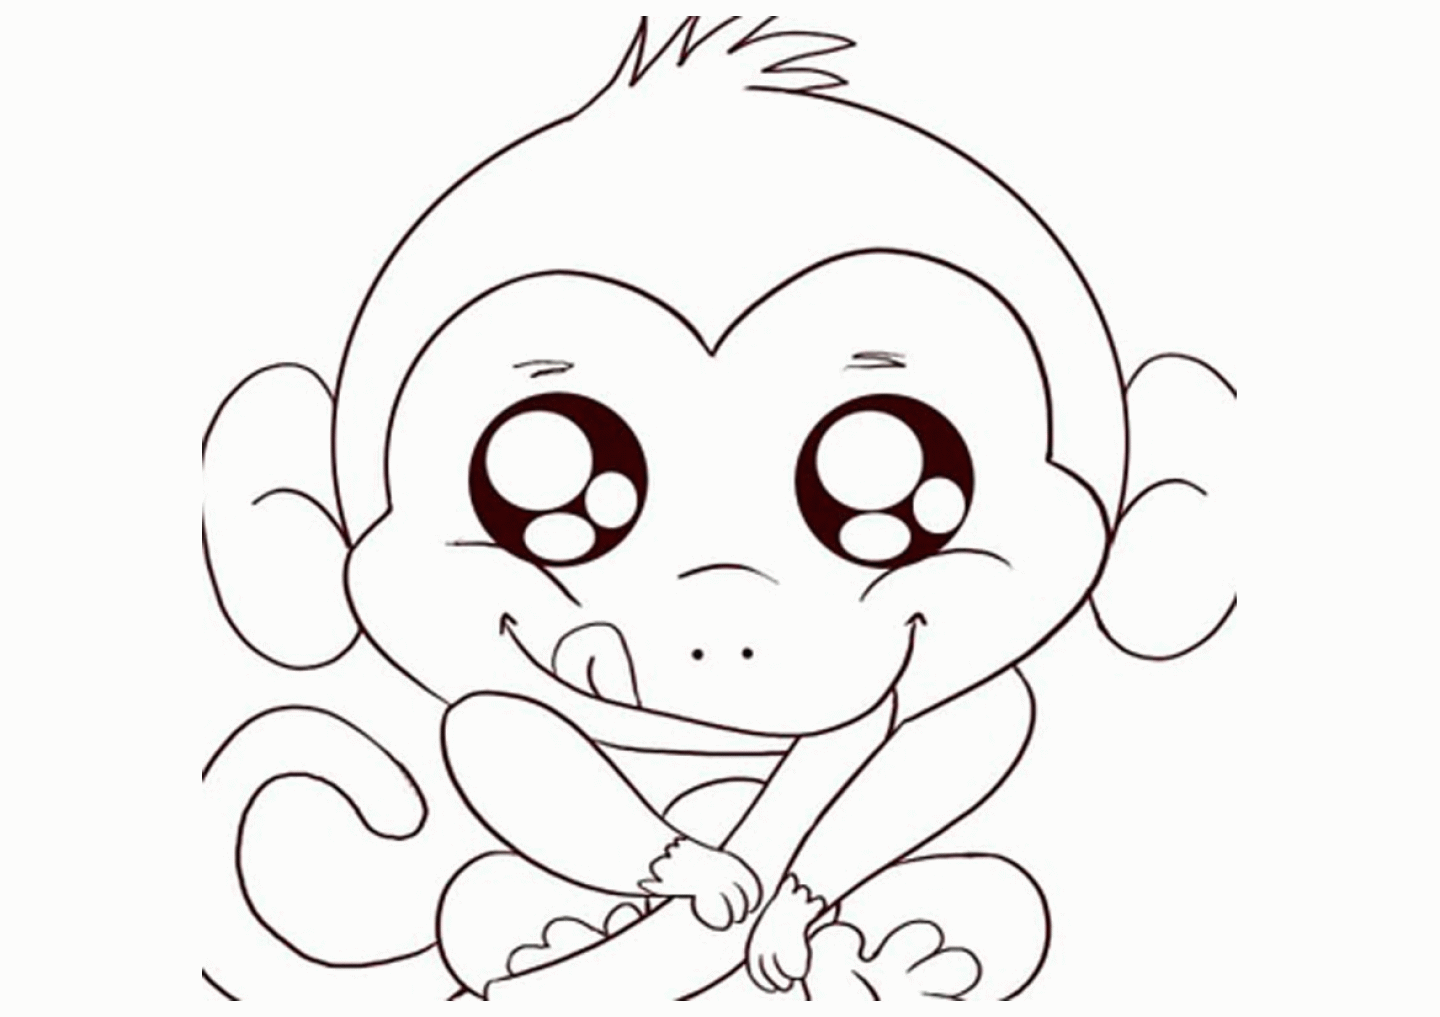 Printable Monkey Coloring Pages Kids - Colorine.net | #19819